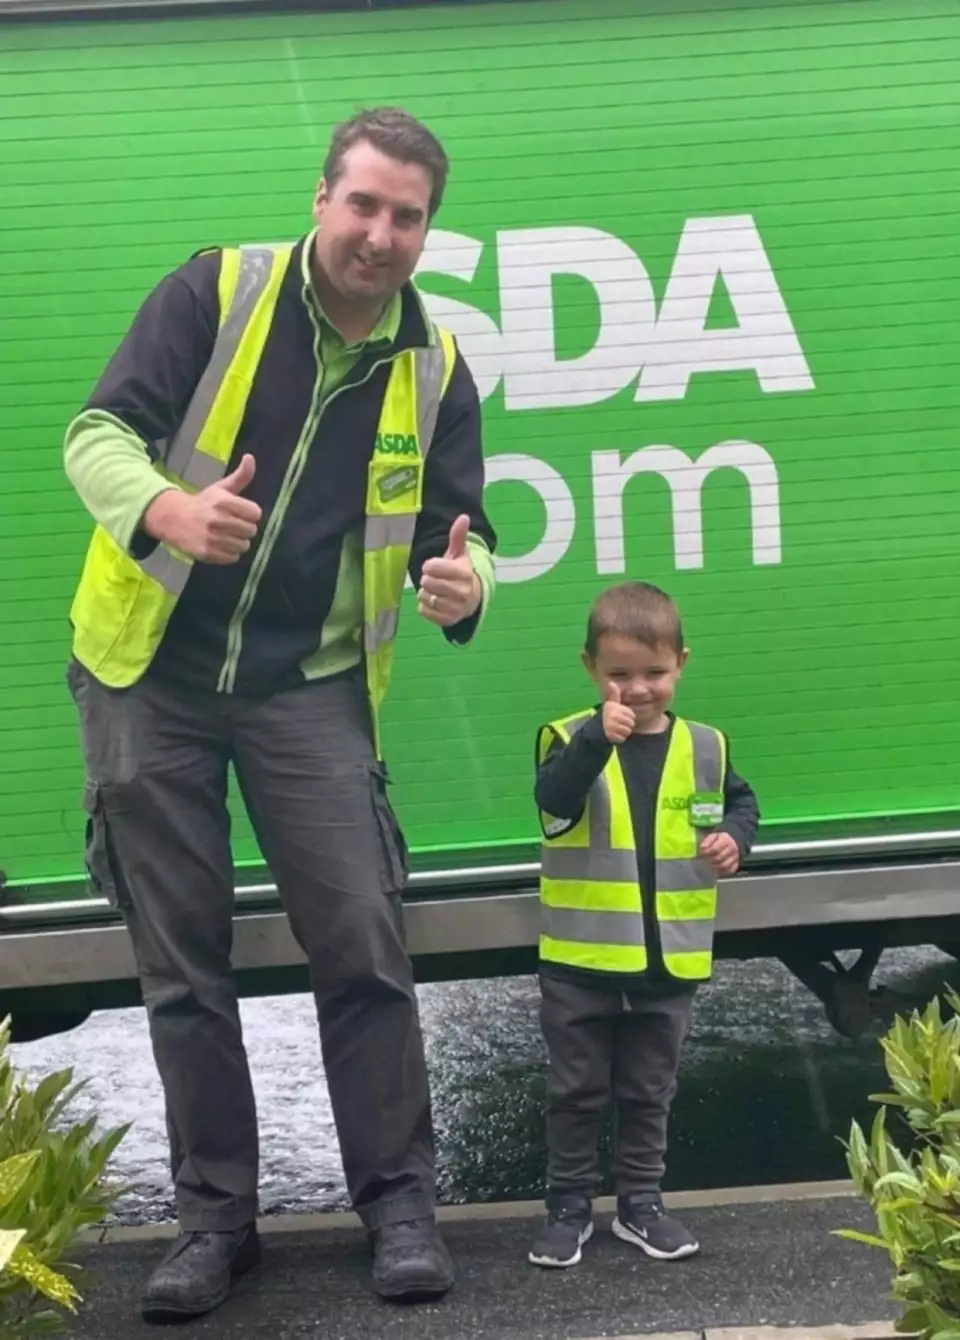 Three-year-old George is a home shopping delivery driver in the making image